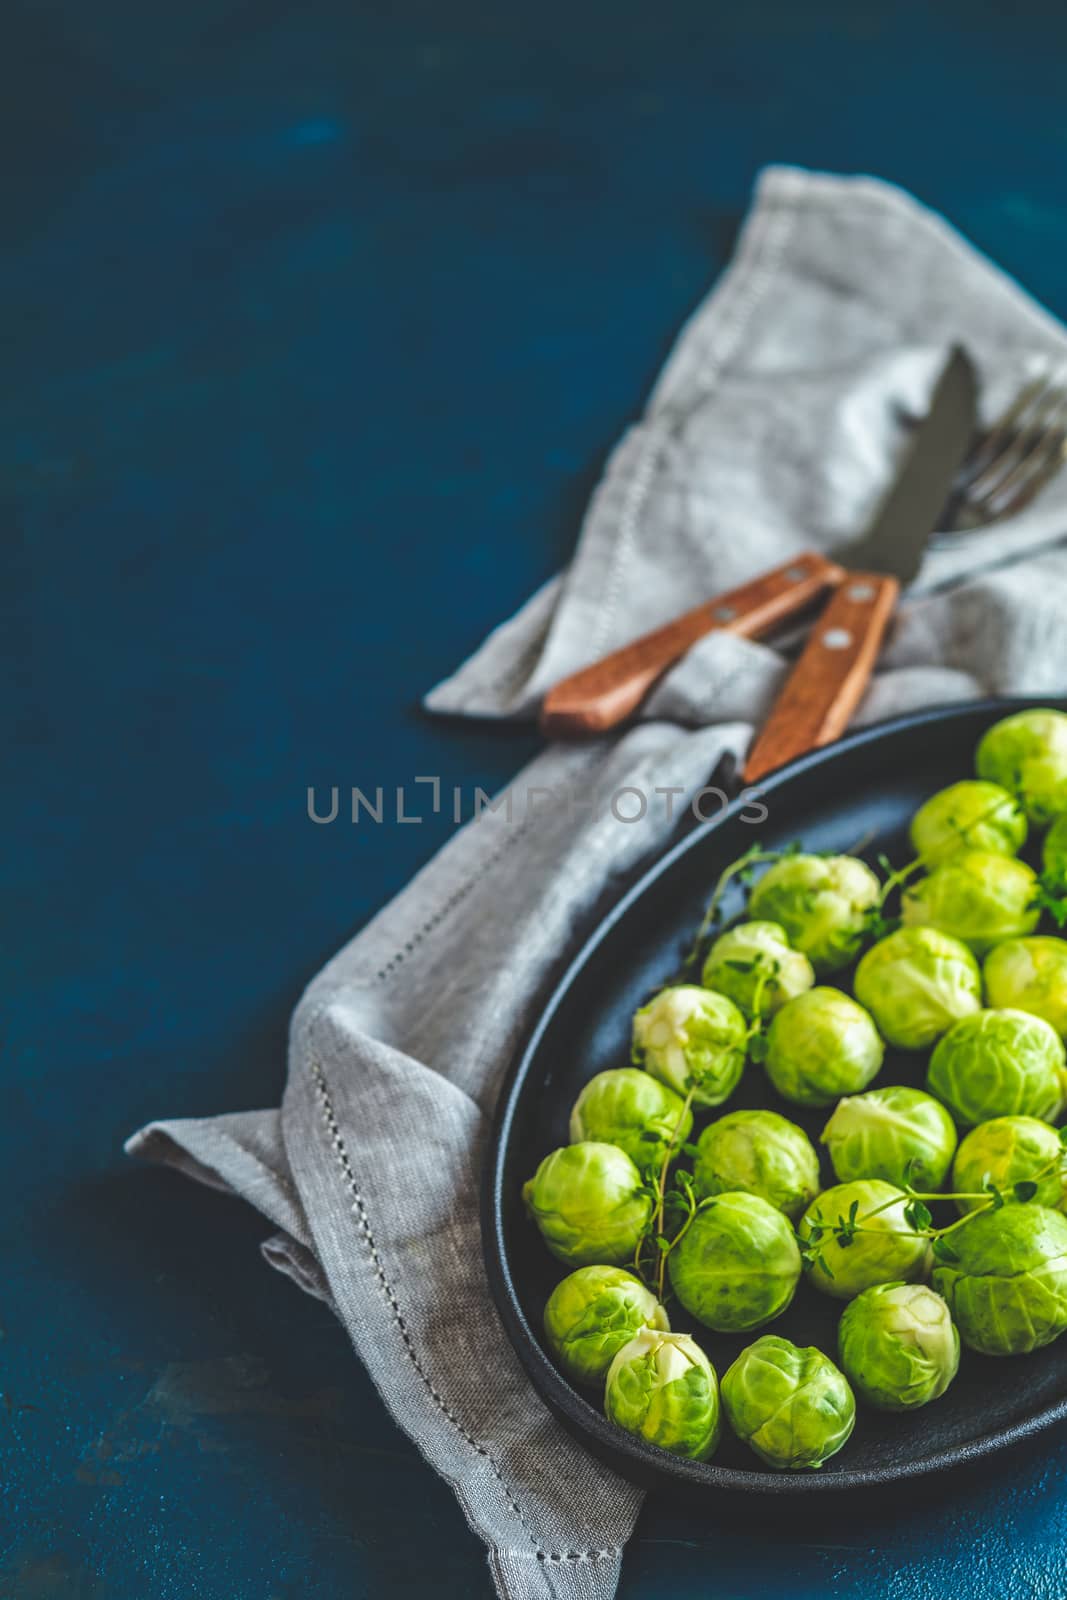 Fresh organic Brussels sprouts in served on black plate, dark blue concrete table surface, copy space for you text.